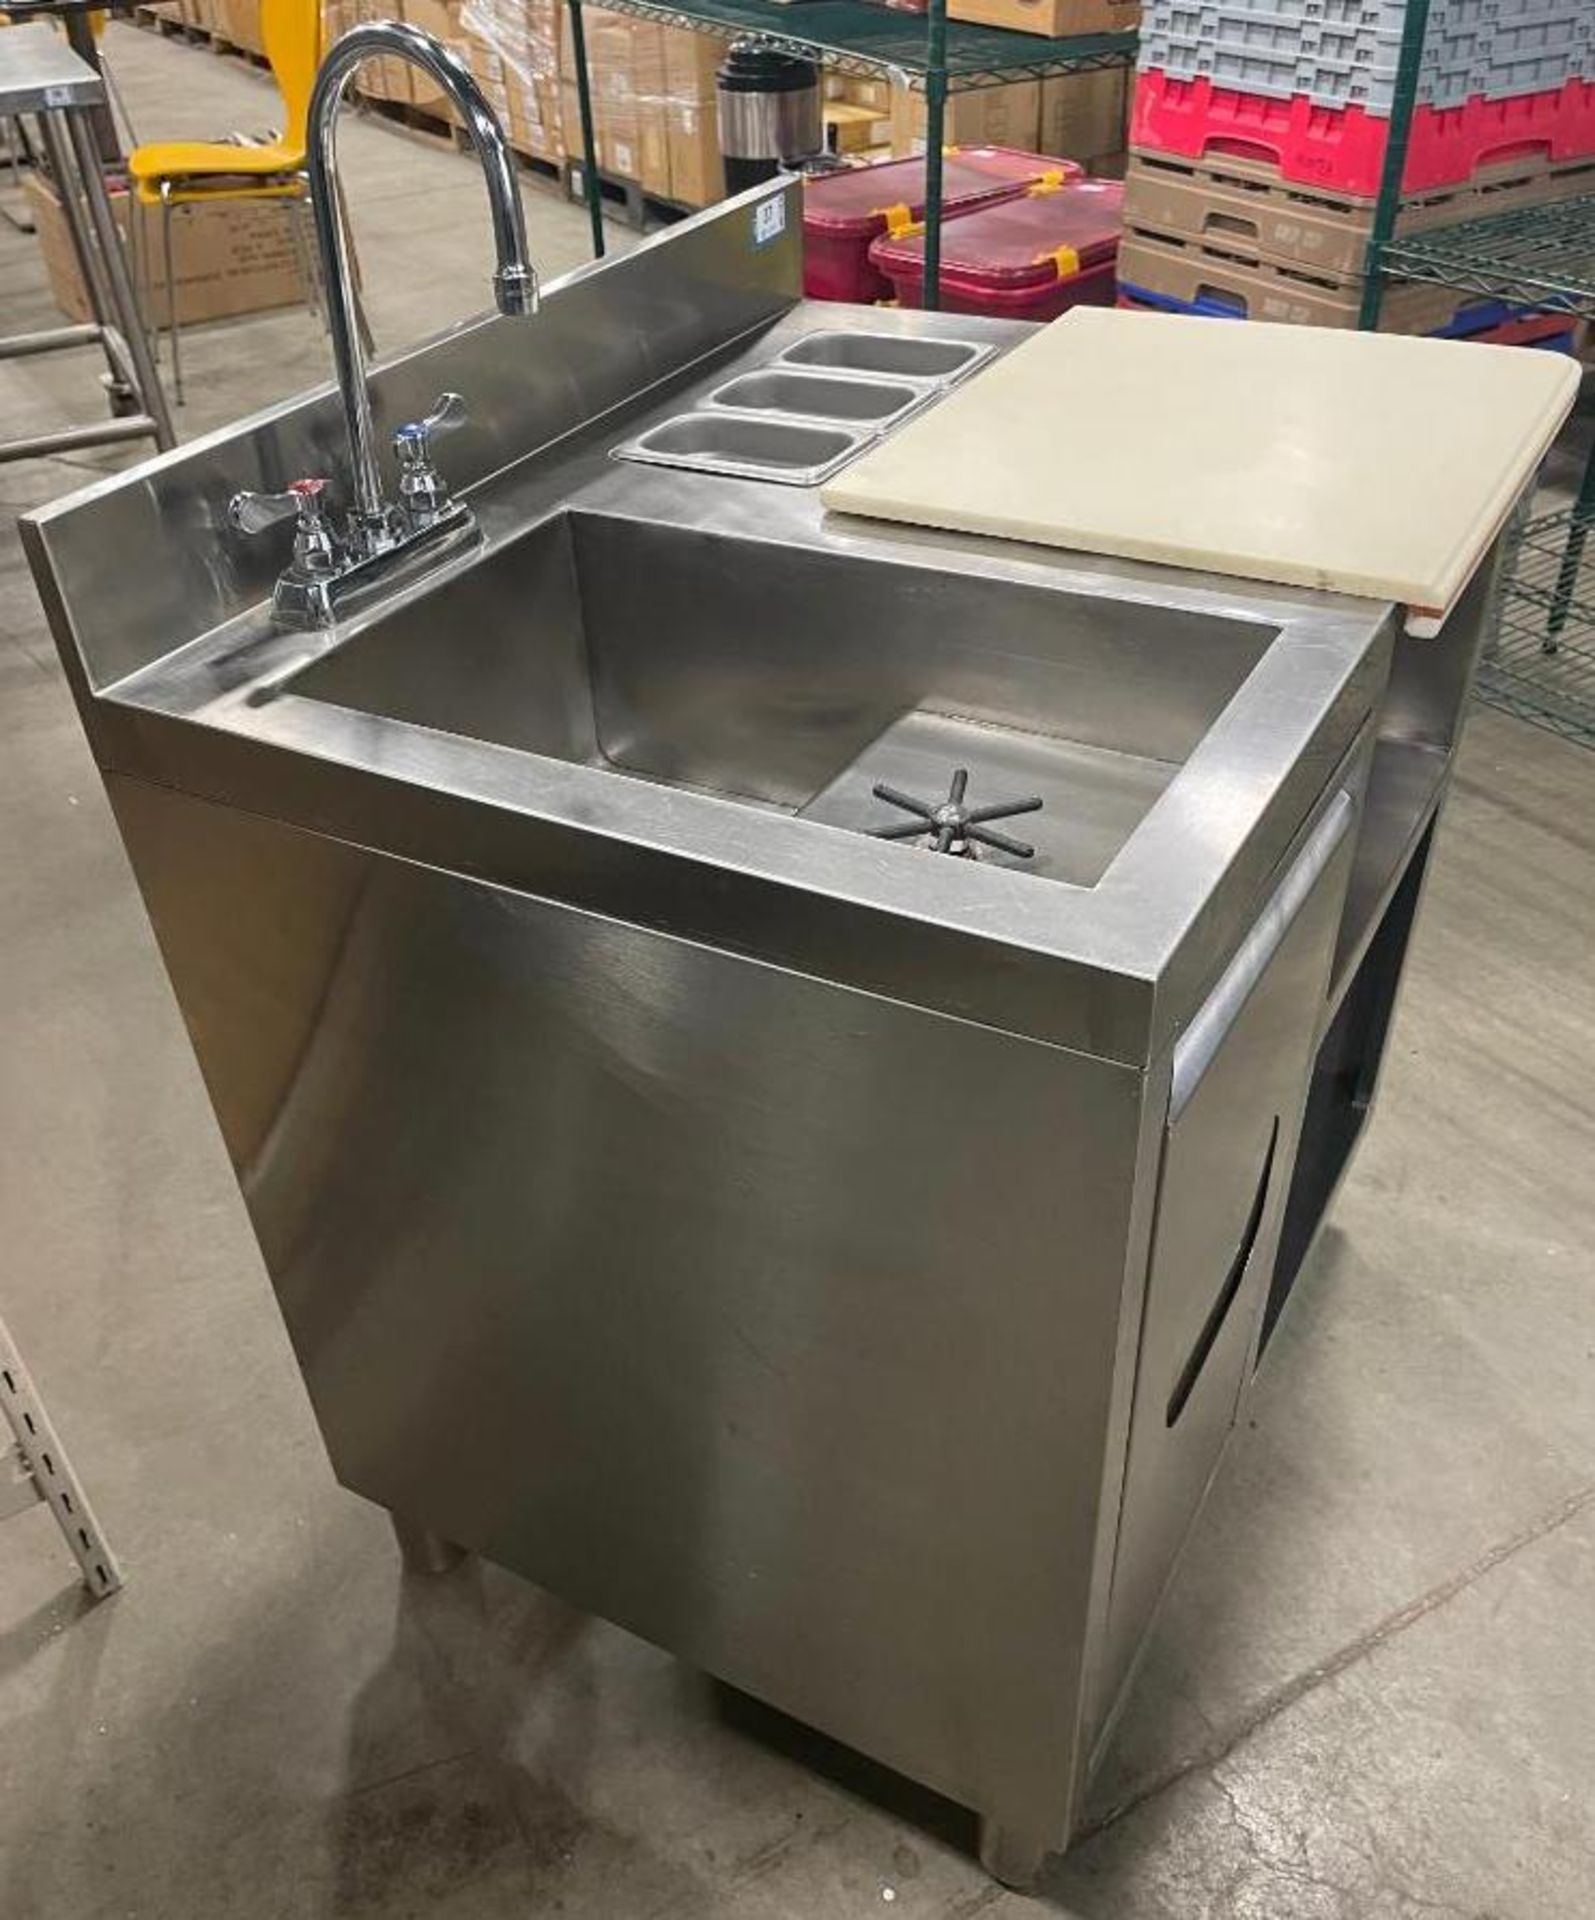 STAINLESS STEEL BEVERAGE TABLE WITH SINK, GLASS WASHER AND CUTTING BOARD - Image 7 of 14